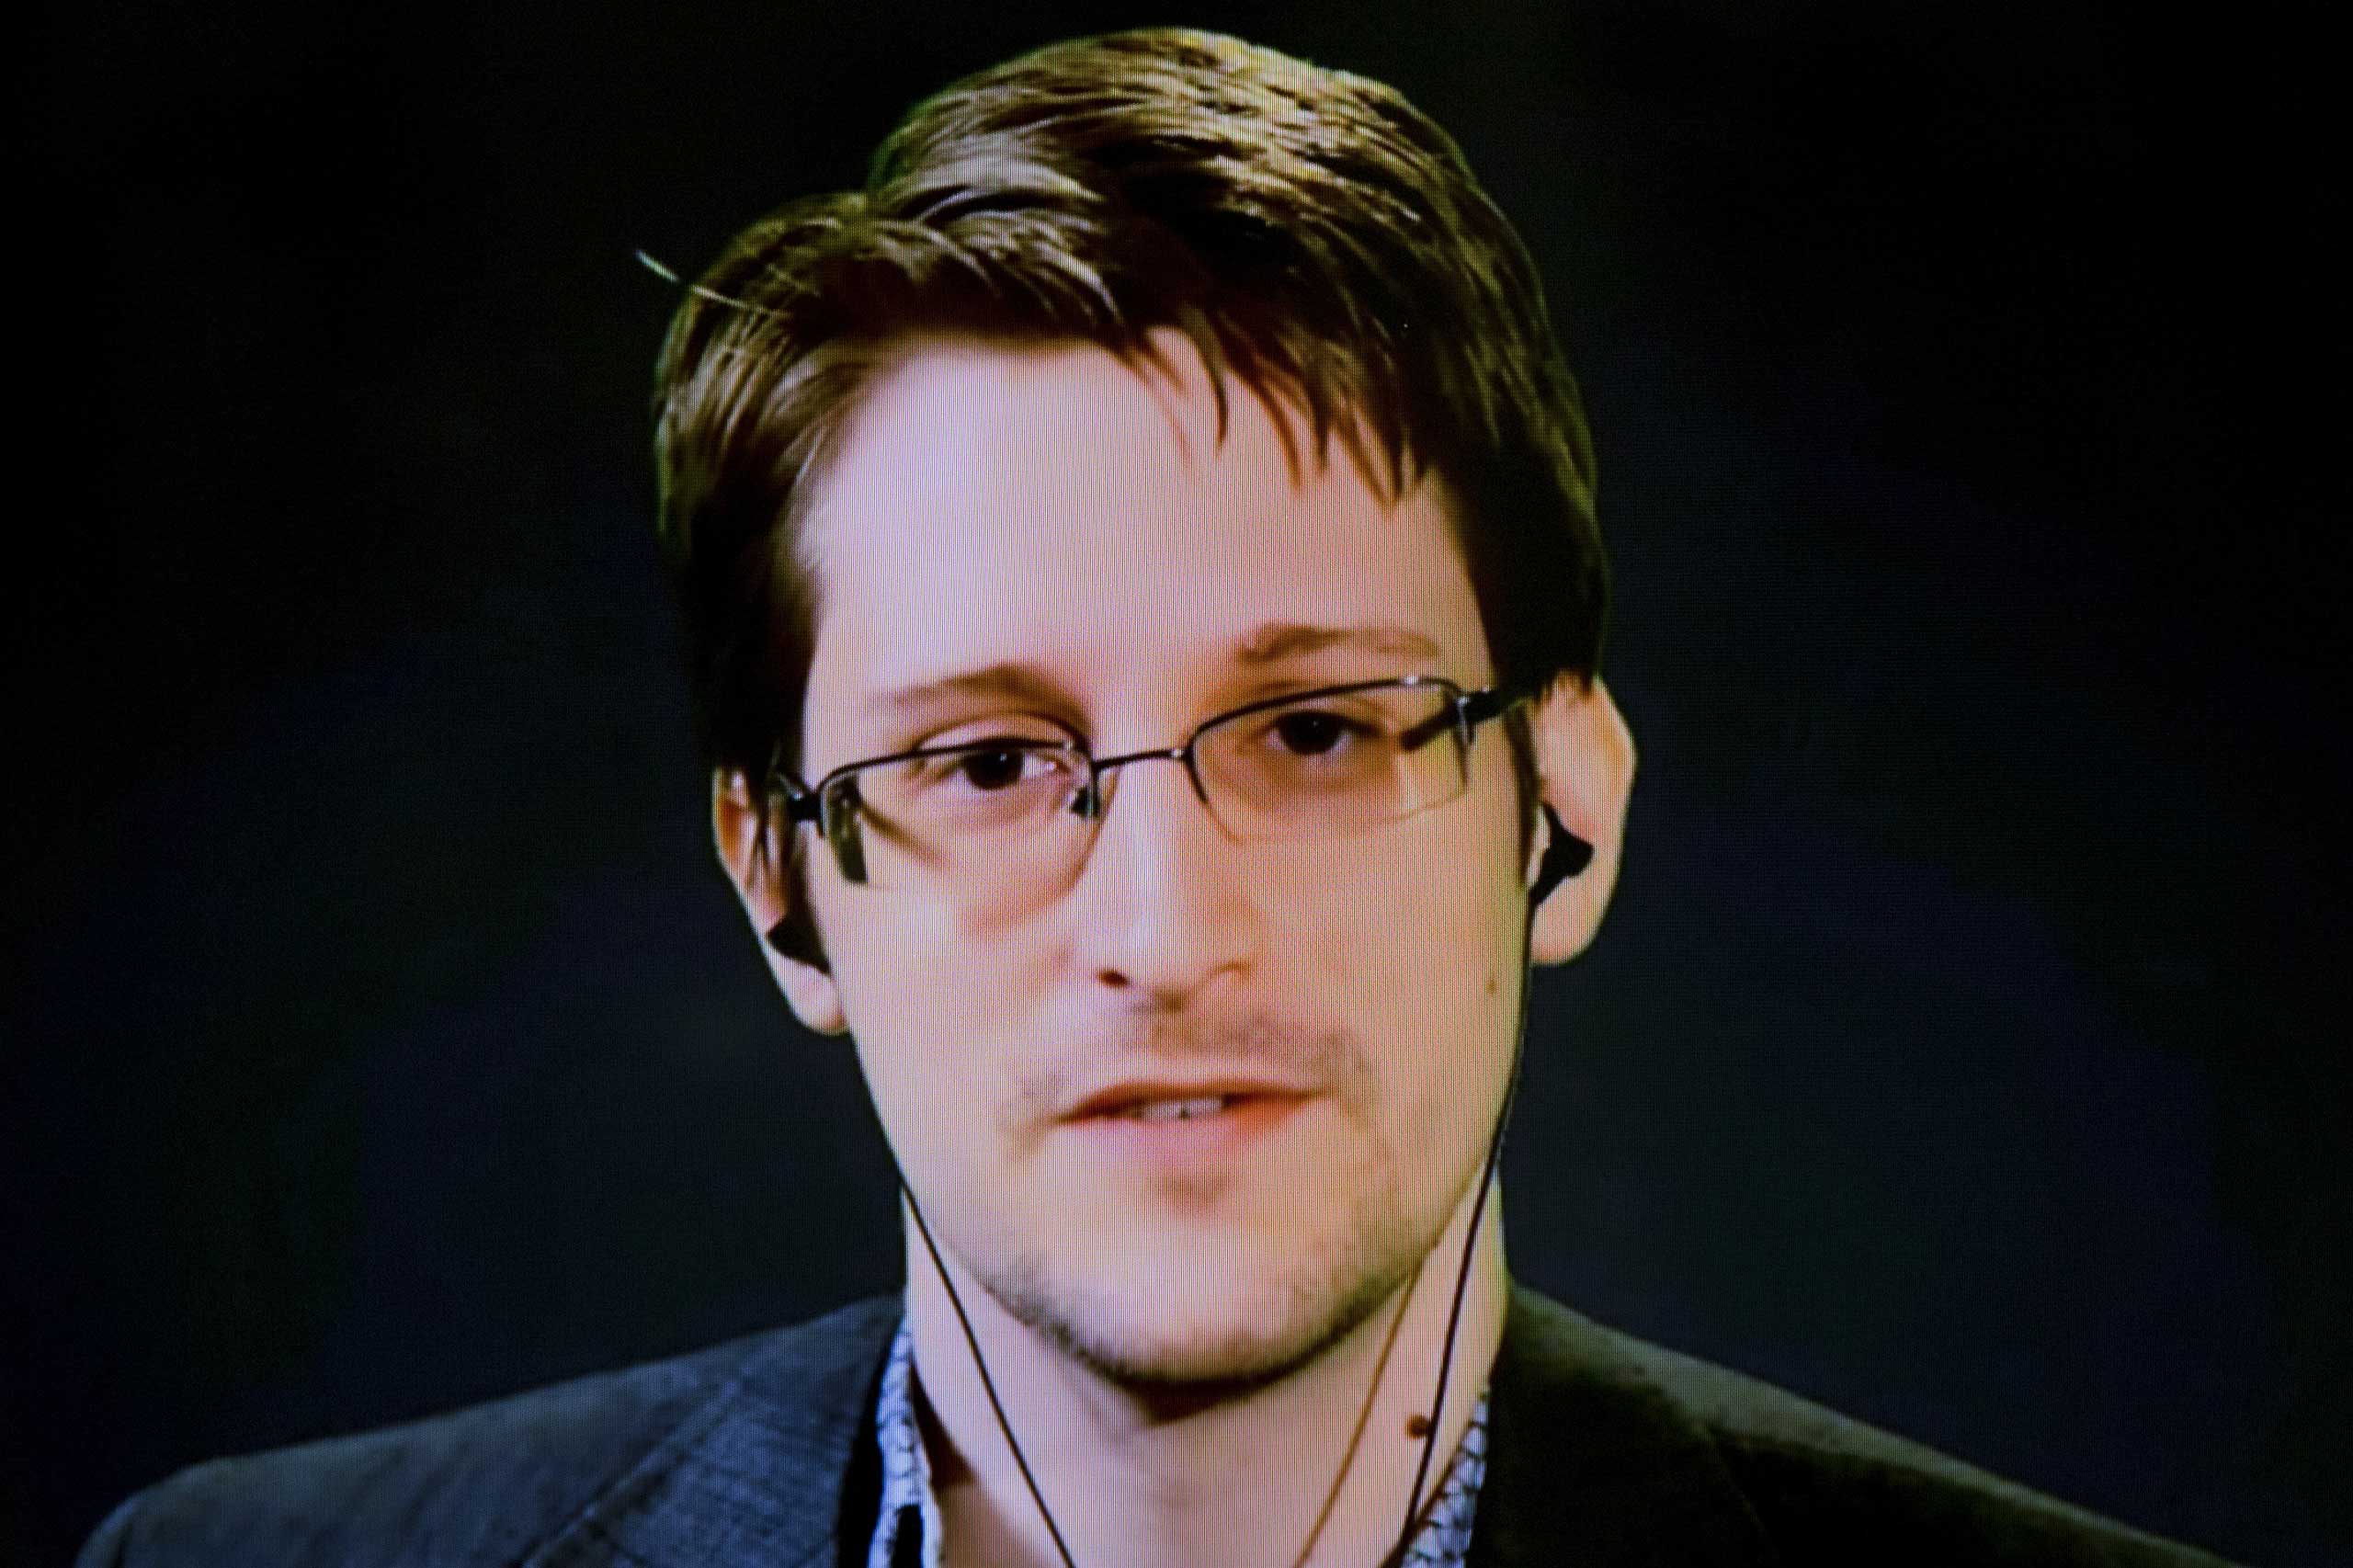 American whistleblower Edward Snowden delivers remarks via video link from Moscow to attendees at a discussion regarding an International Treaty on the Right to Privacy, Protection Against Improper Surveillance and Protection of Whistleblowers in Manhattan, on Sept. 24, 2015. (Andrew Kelly—Reuters)